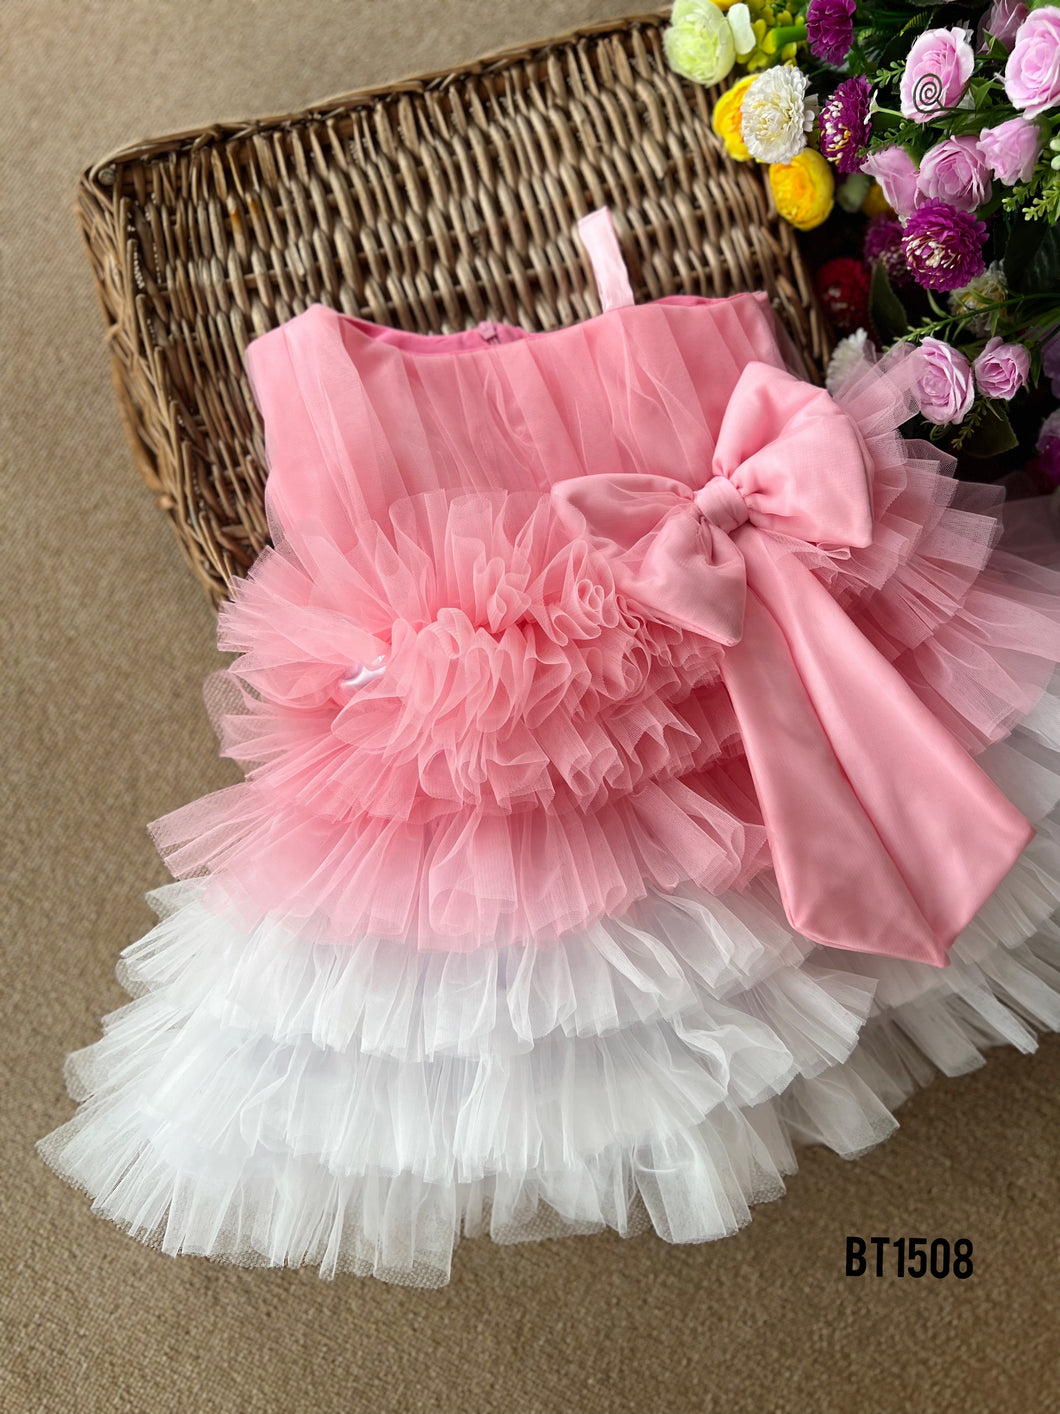 BT1508 Candyfloss Dream Layered Dress - Pastel Perfection for Little Darlings